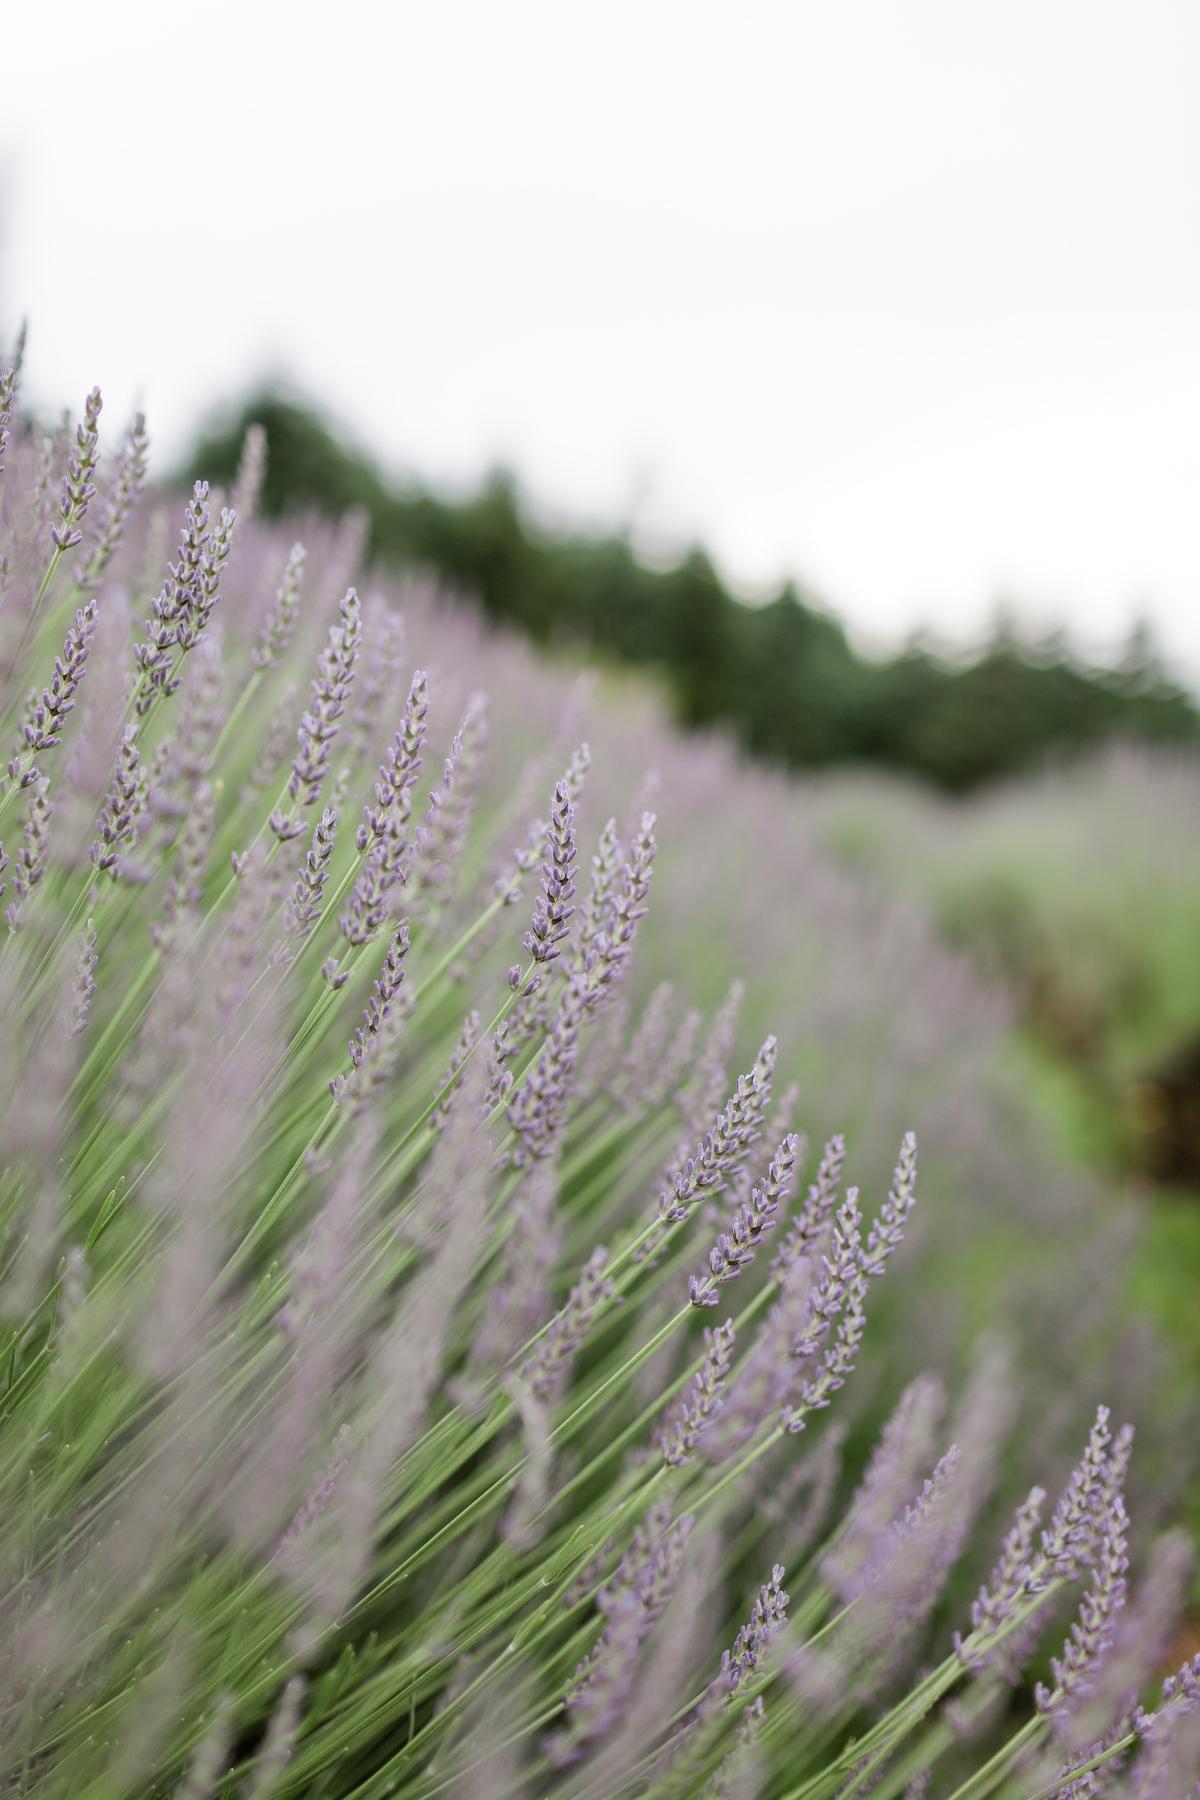 Thompson has grown her lavender farm from 20 plants to now 450, and has plans to purchase a new farm with thousands more. (Courtesy of Evernew Photography)